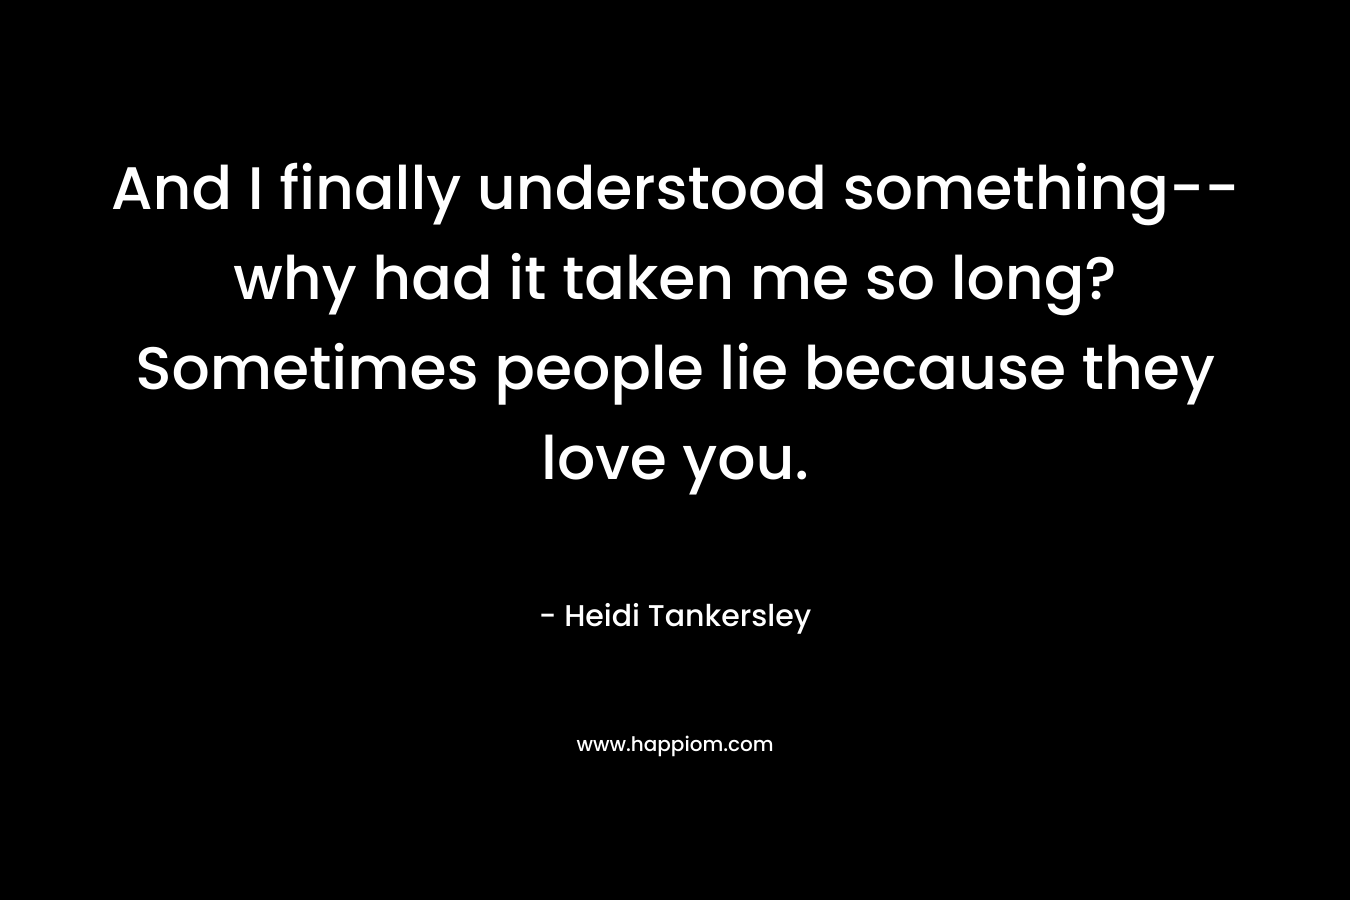 And I finally understood something--why had it taken me so long? Sometimes people lie because they love you.